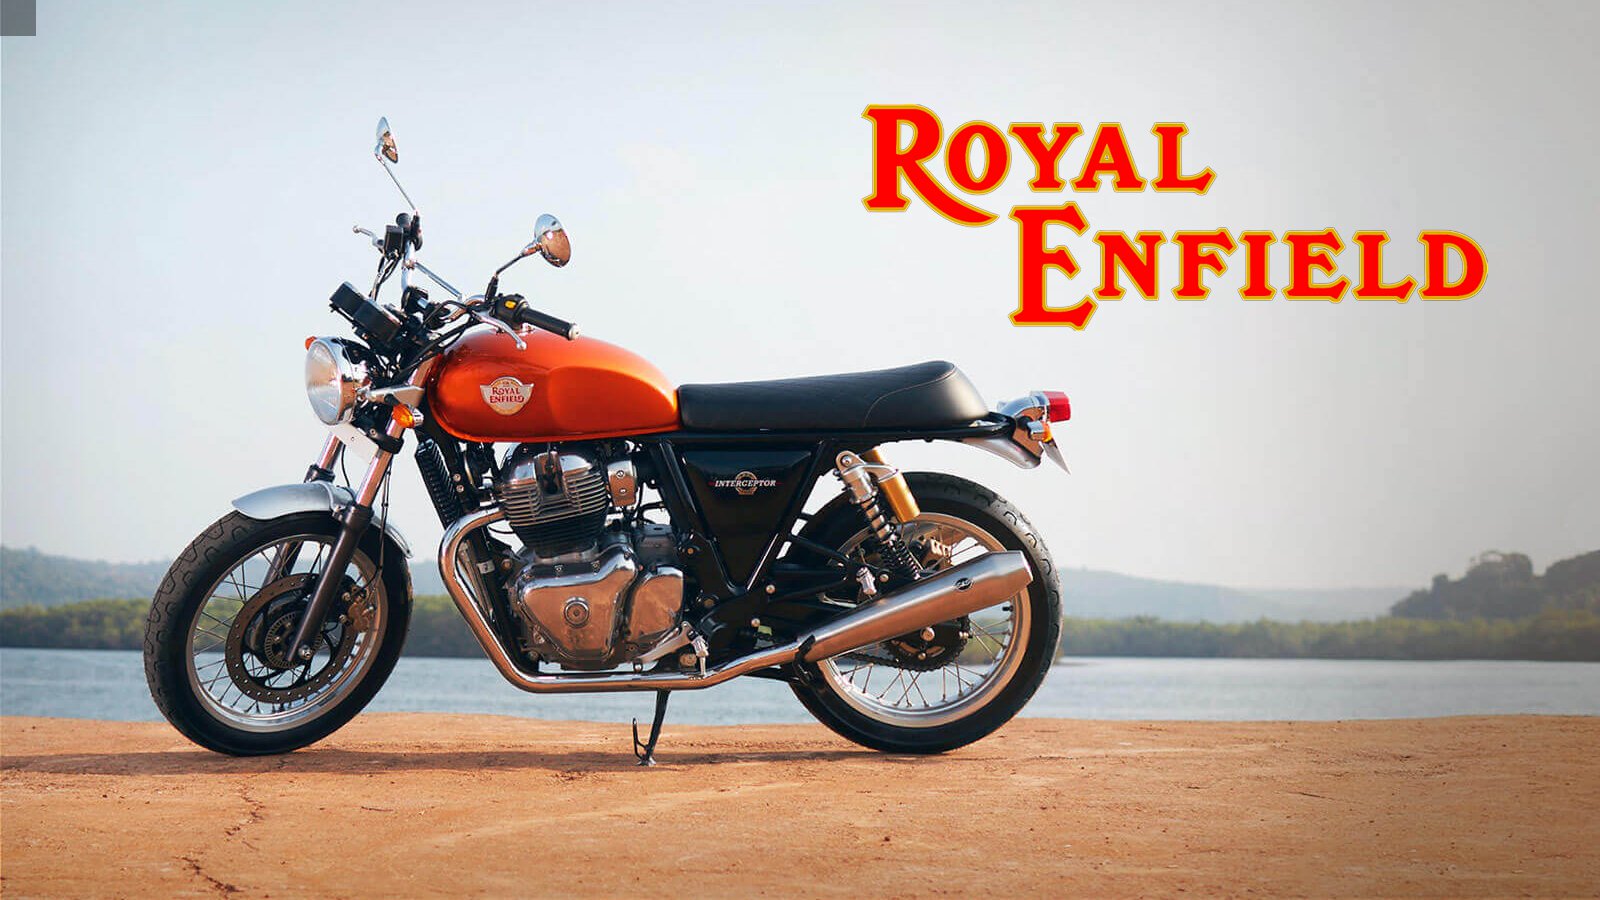 Royal Enfield Lines set for Rs 800 crores for current funding